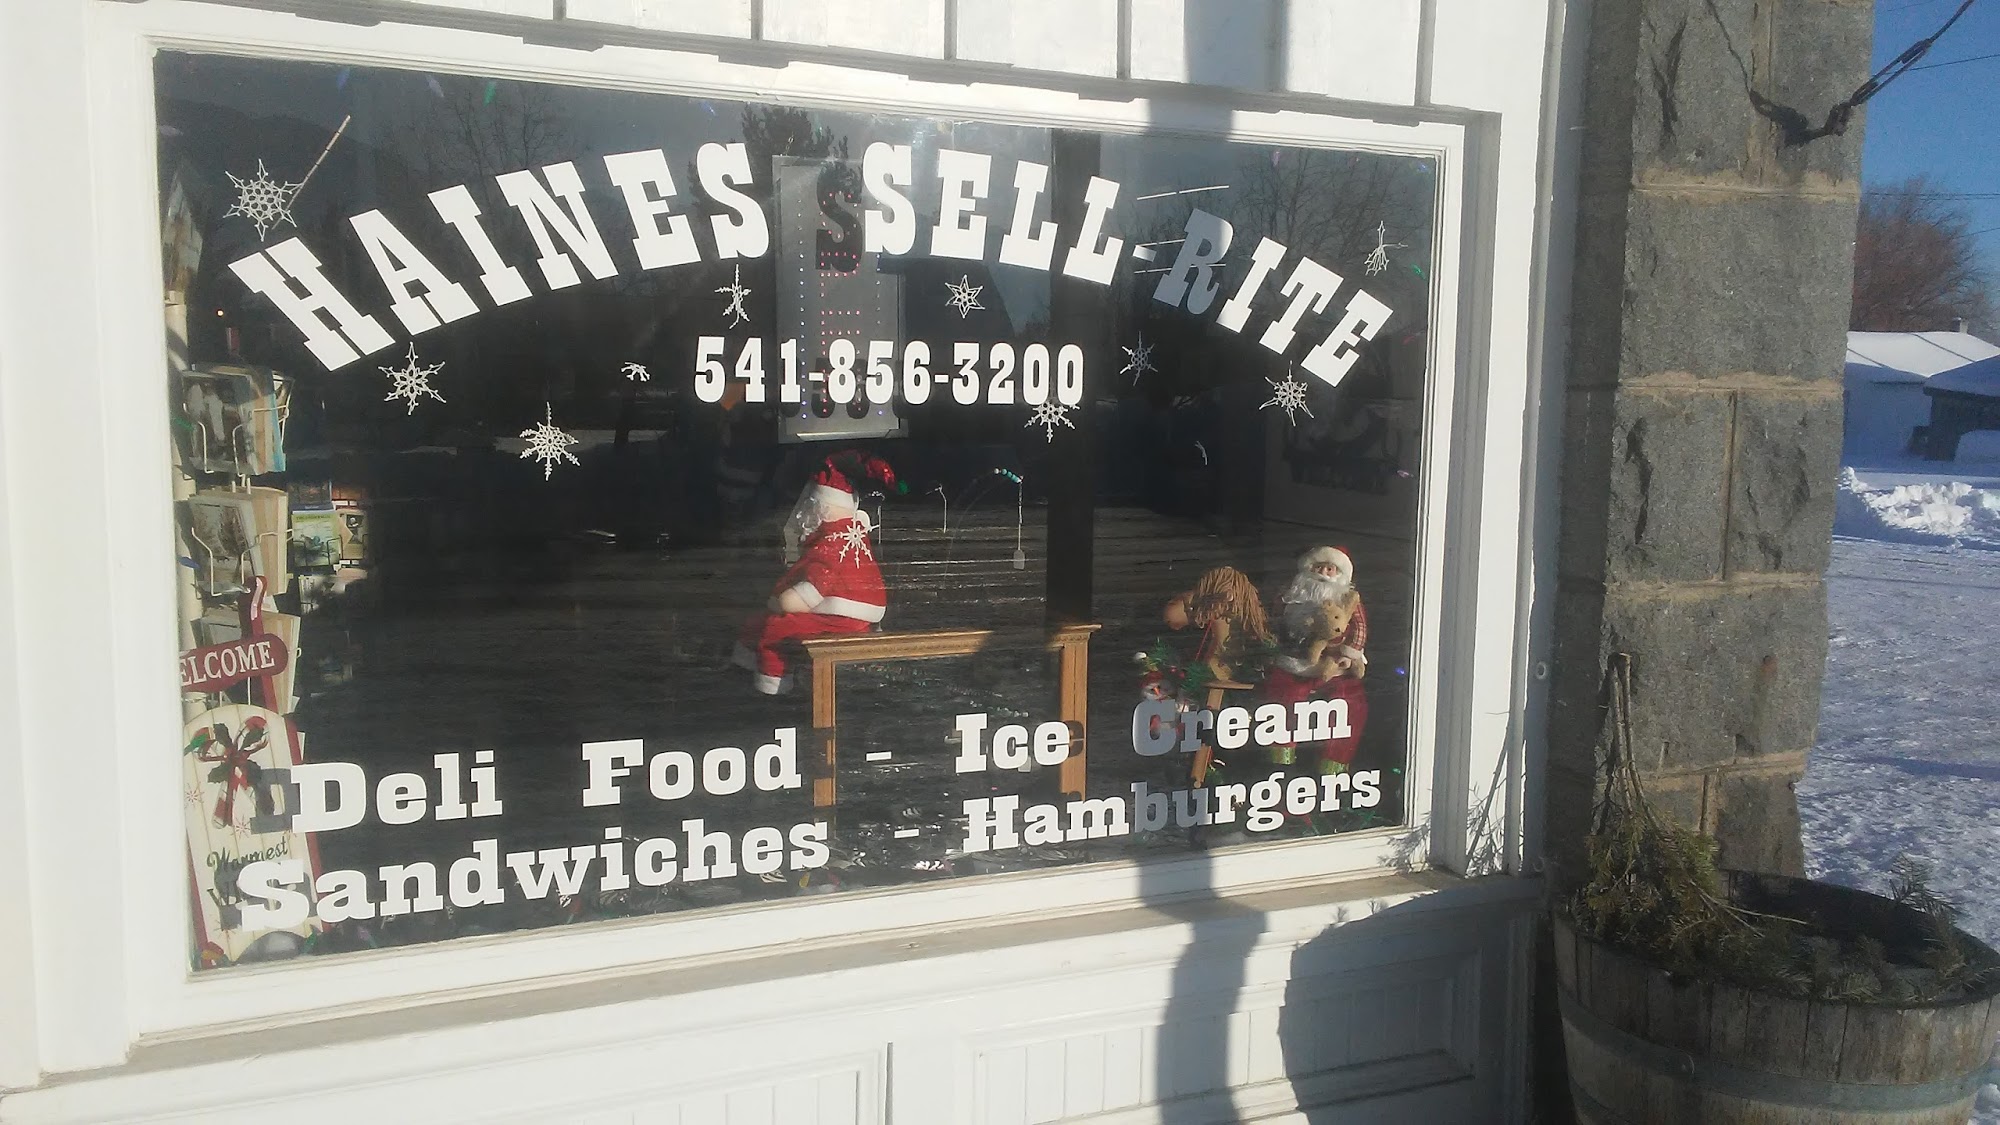 Haines Sell-Rite